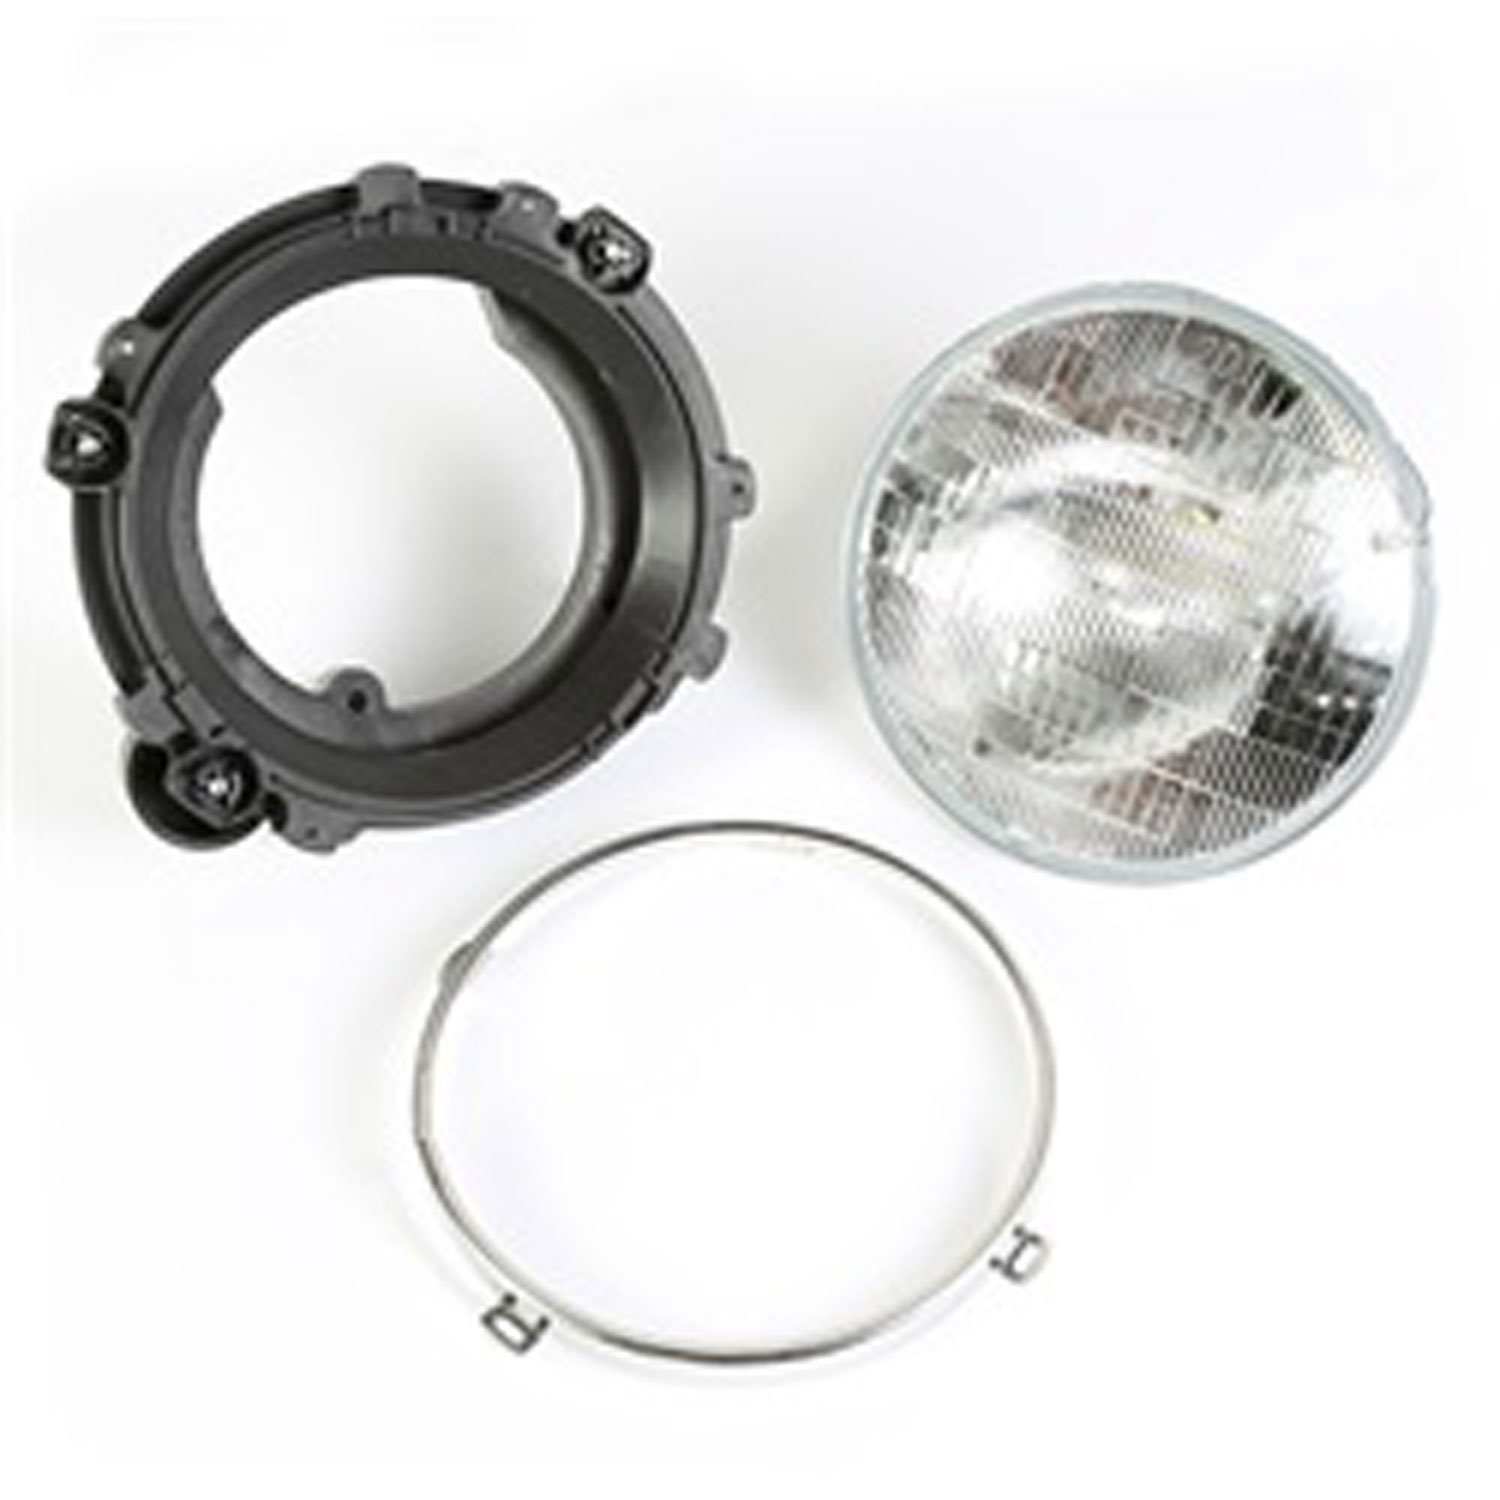 Replacement headlight assembly from Omix-ADA, Fits left side on 97-06 Jeep Wrangler